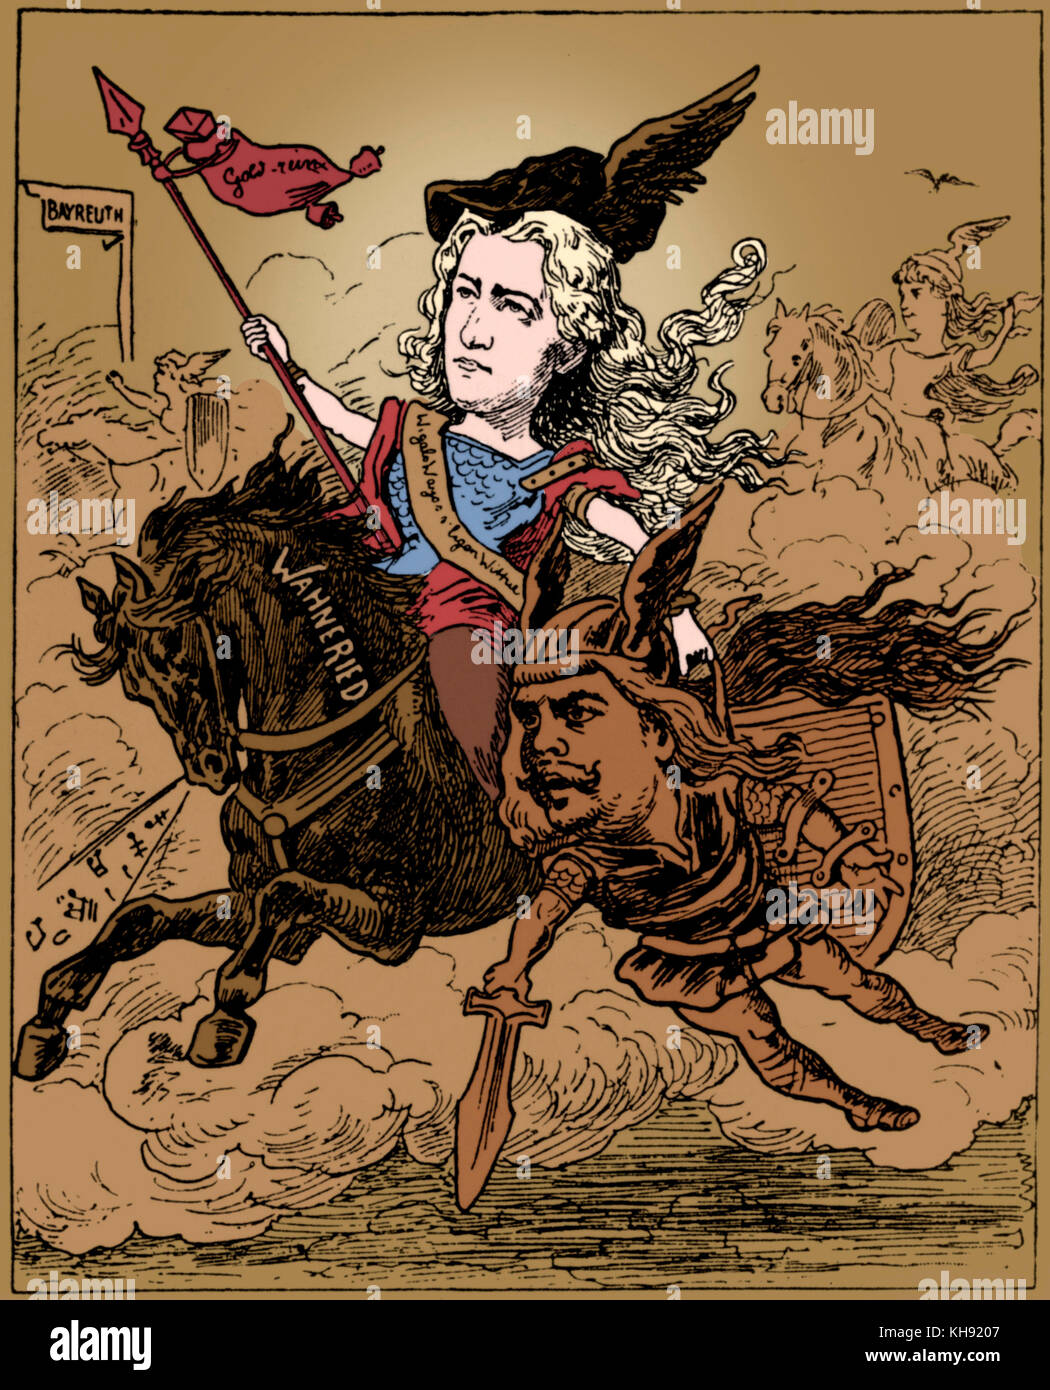 WAGNER, Cosima - caricature - dressed as character from Wagner's opera Ring Cycle / Nibelungen. ' Frau Cosimas Walkürenritt ' ( Miss Cosima's Ride of the Valkeries) Cosima pictured as Brünnhilde, carrying Ernst van Dyck as Siegmund. Die Walkure Stock Photo